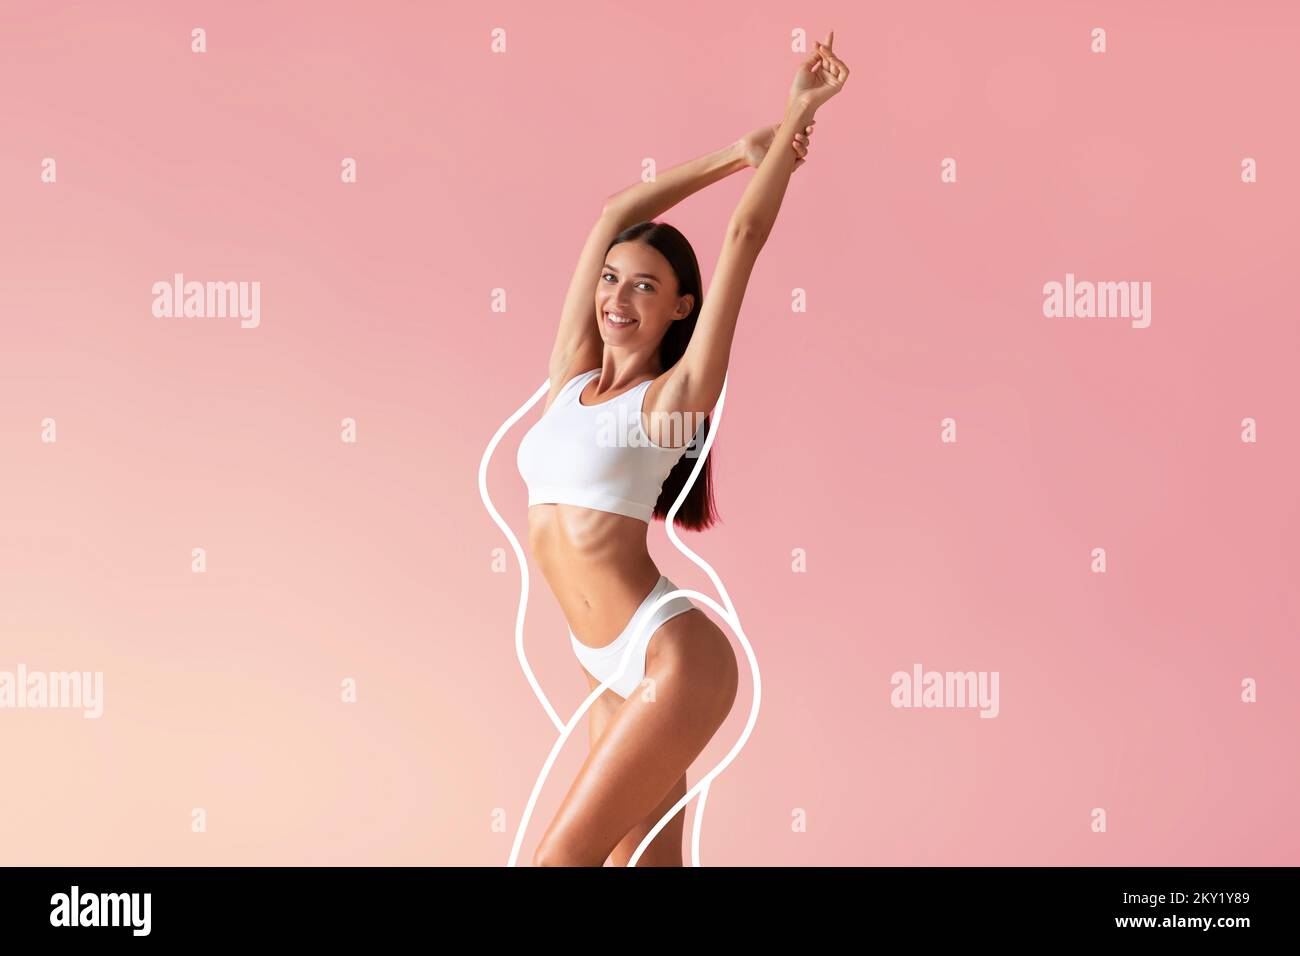 Wellness Concept. Happy slim woman in underwear posing with hands raised up Stock Photo